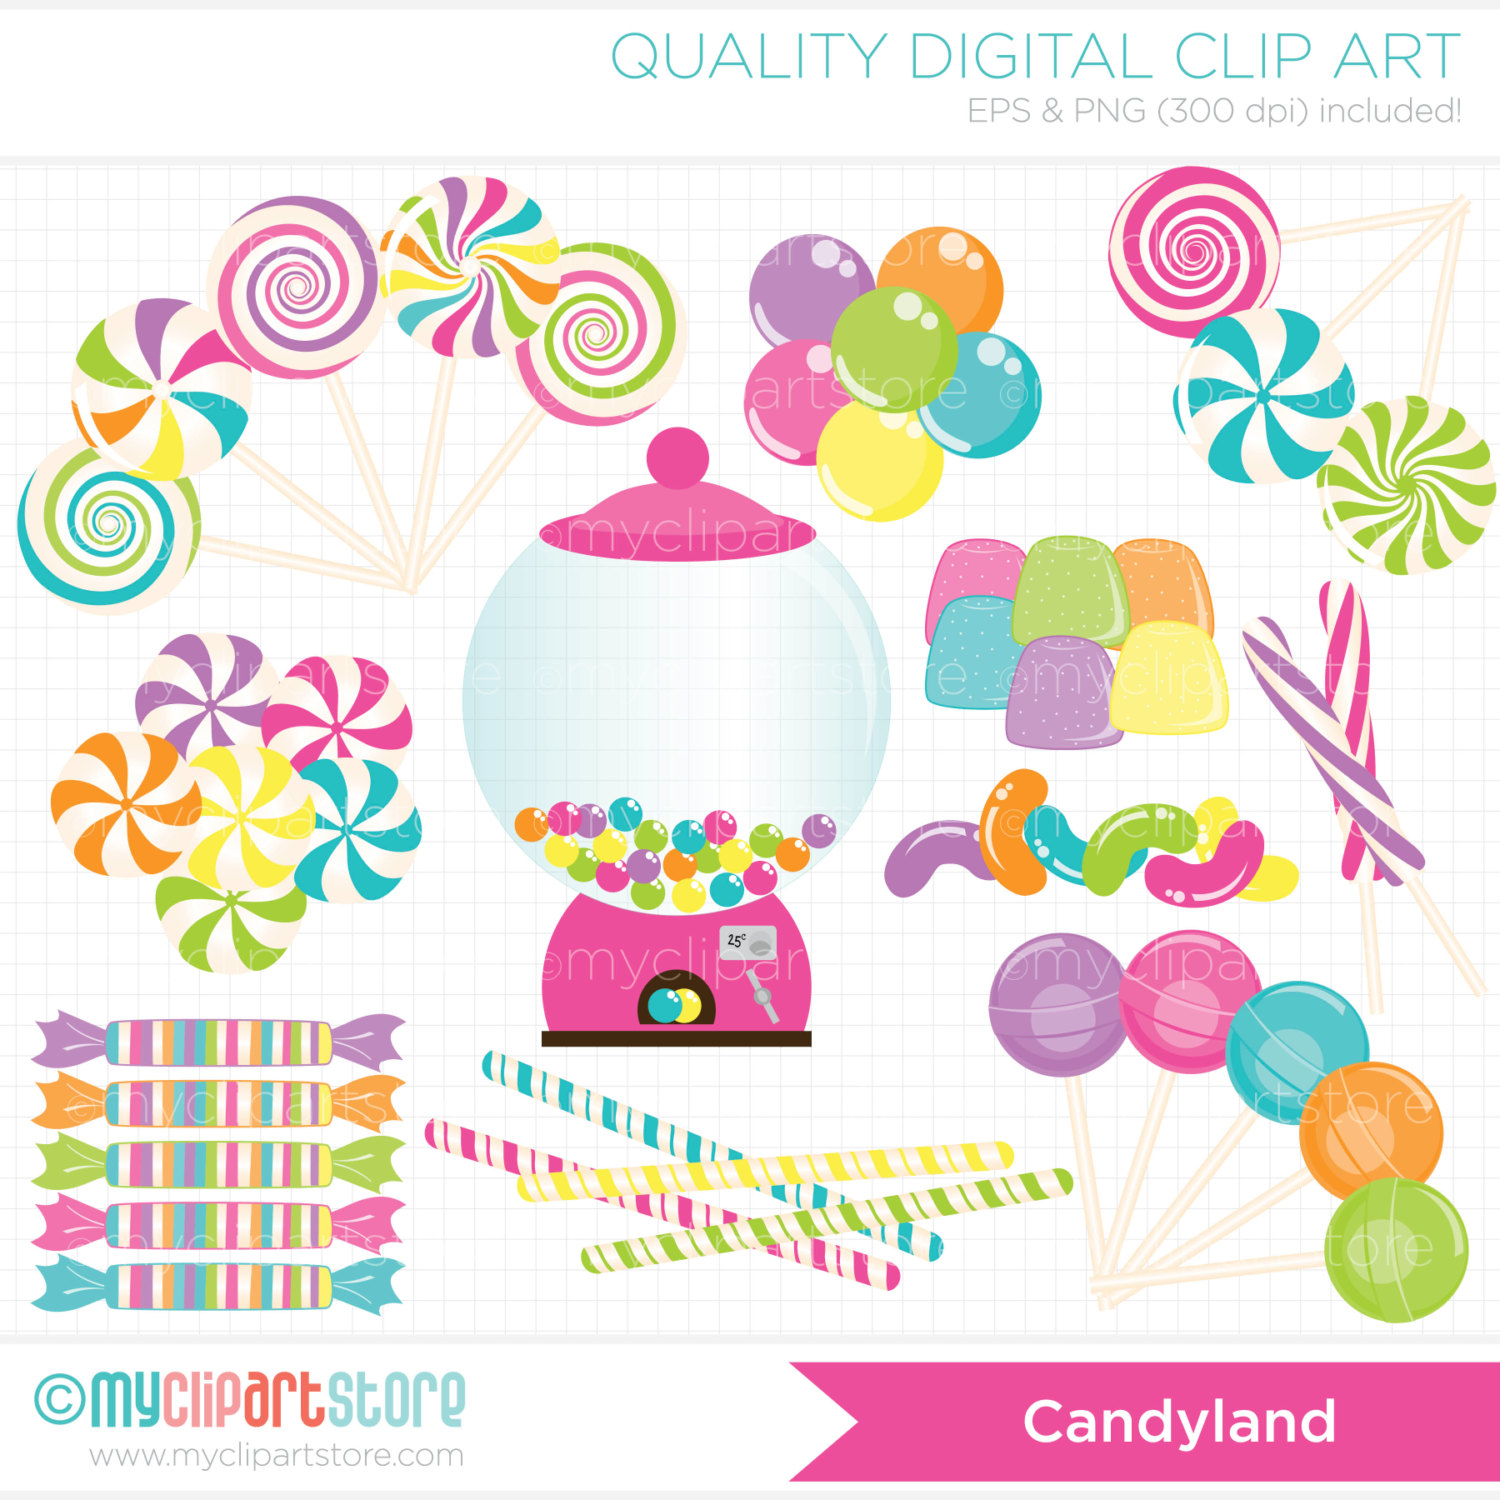  clip art clipartlook. Candyland clipart theme